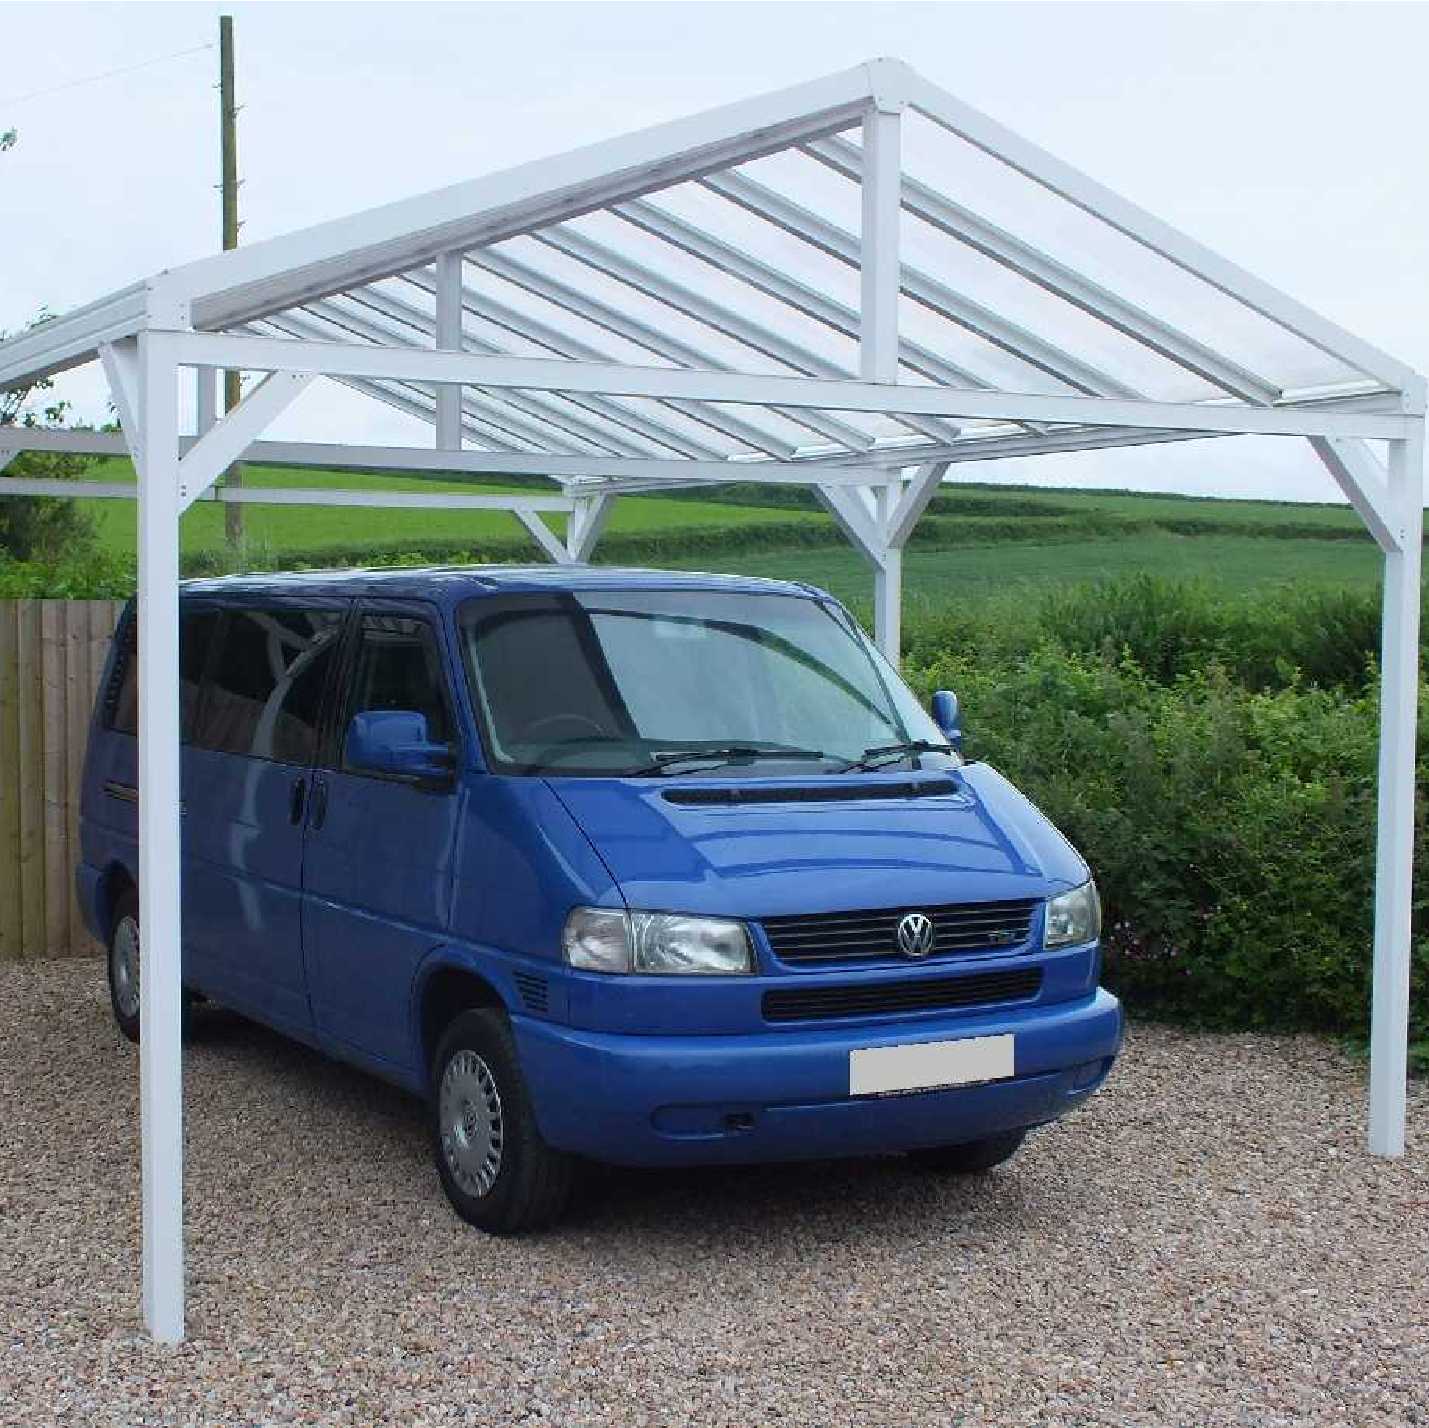 Omega Smart Free-Standing, White Gable-Roof (type 1) Canopy with 16mm Polycarbonate Glazing - 7.4m (W) x 3.5m (P), (8) Supporting Posts